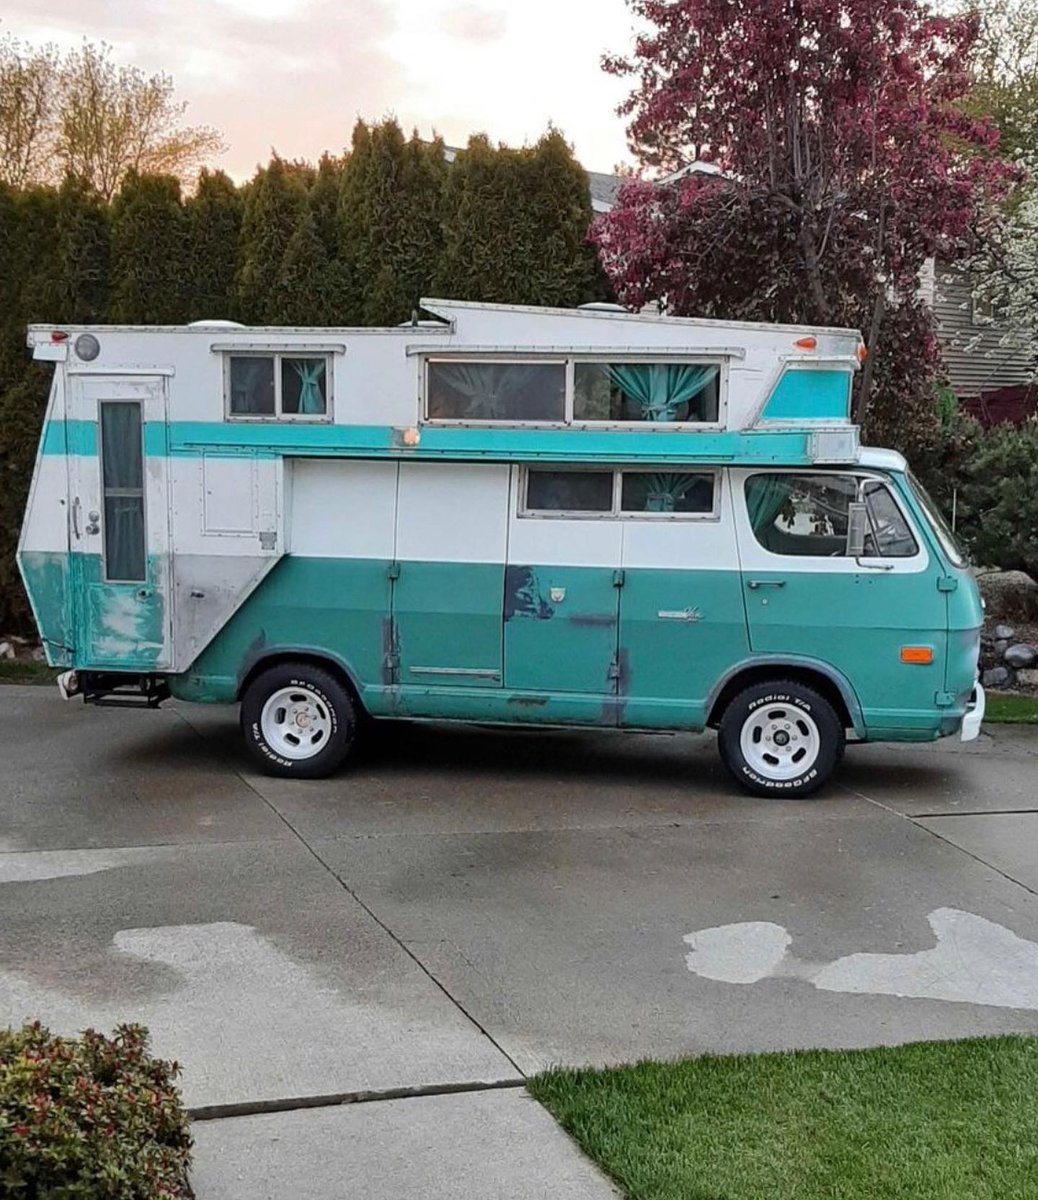 Check out this blast from the past! 😍 Rolling straight outta 1968, this Chevy boasts a Kamp King Koaches conversion that turns heads and sparks campfire stories.  🚌💫

📷: @housecar_haven 

#CamperBuyerUK #modified #american #ontheroad #outdoors #campervanlife #retrostyle